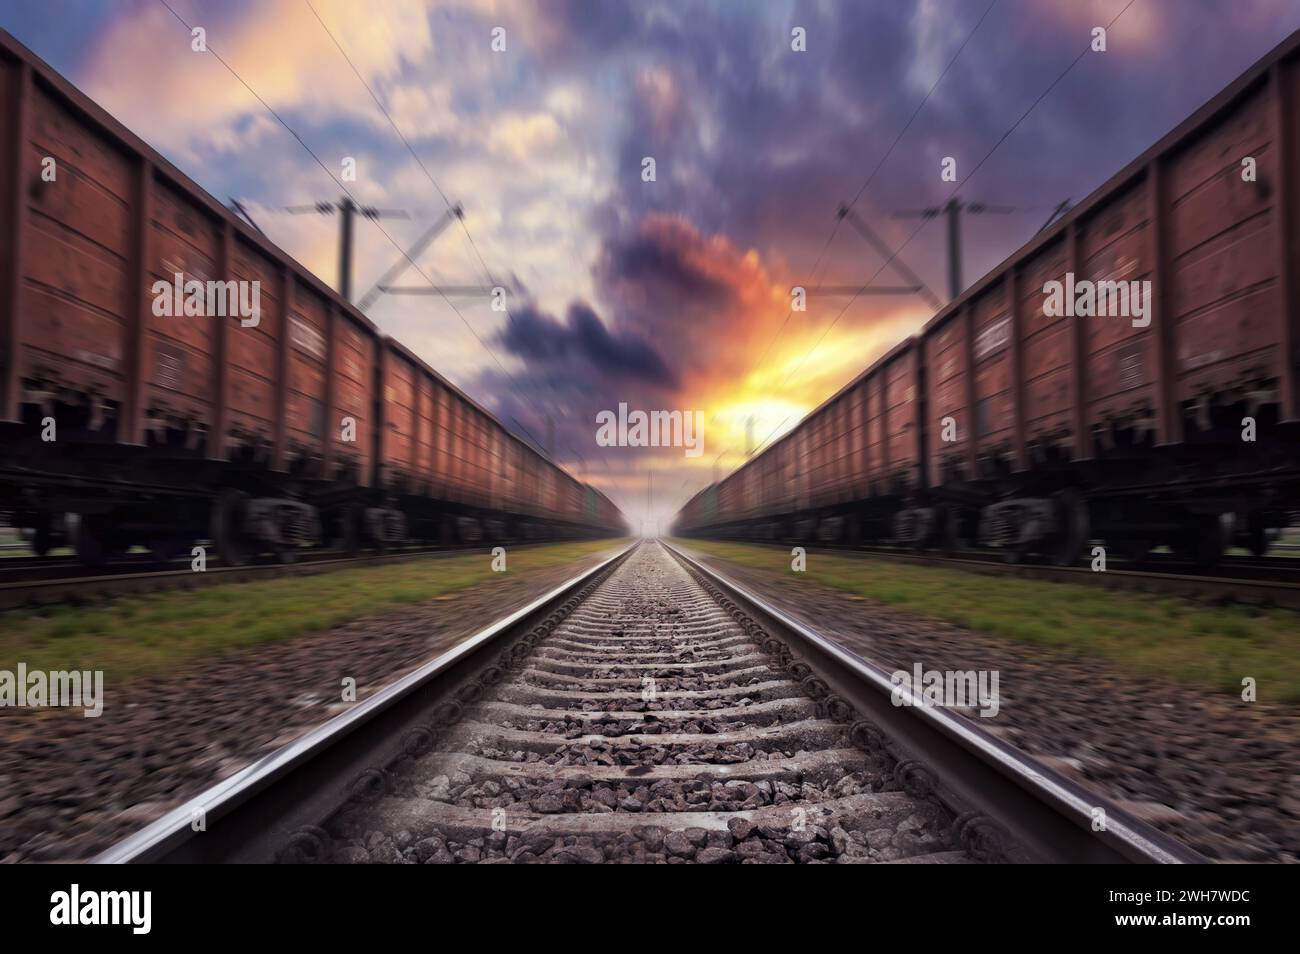 Railroad in motion with blur effect at sunset with dramatic sky. Train traveling on the railway. Stock Photo